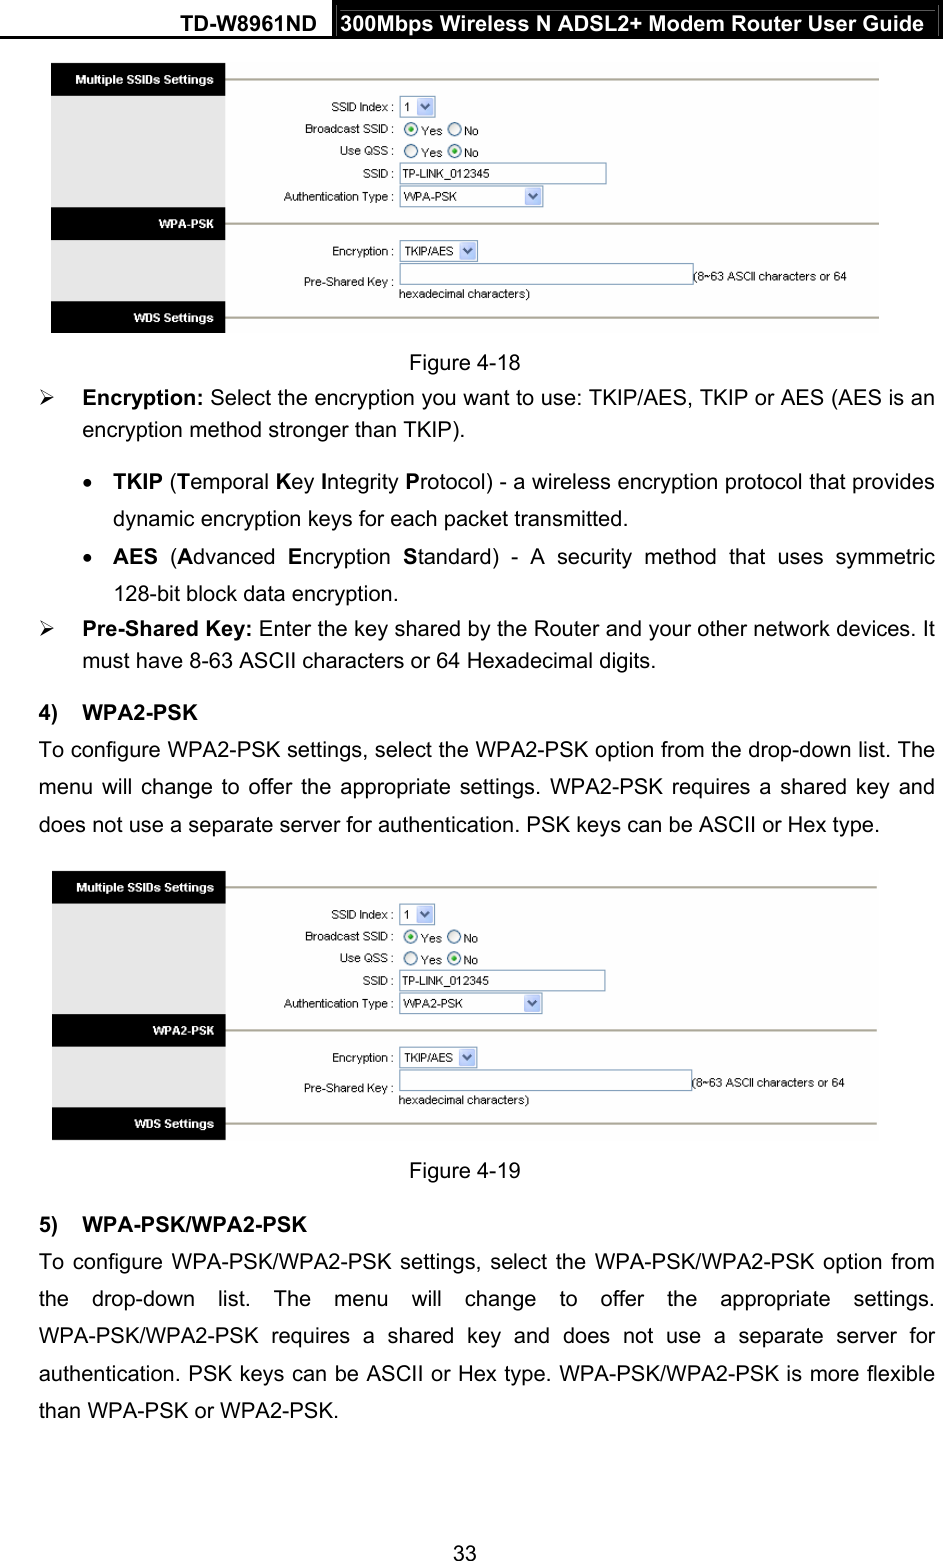 TD-W8961ND  300Mbps Wireless N ADSL2+ Modem Router User Guide  33 Figure 4-18 ¾ Encryption: Select the encryption you want to use: TKIP/AES, TKIP or AES (AES is an encryption method stronger than TKIP). • TKIP (Temporal Key Integrity Protocol) - a wireless encryption protocol that provides dynamic encryption keys for each packet transmitted. • AES (Advanced  Encryption  Standard) - A security method that uses symmetric 128-bit block data encryption. ¾ Pre-Shared Key: Enter the key shared by the Router and your other network devices. It must have 8-63 ASCII characters or 64 Hexadecimal digits. 4) WPA2-PSK To configure WPA2-PSK settings, select the WPA2-PSK option from the drop-down list. The menu will change to offer the appropriate settings. WPA2-PSK requires a shared key and does not use a separate server for authentication. PSK keys can be ASCII or Hex type.  Figure 4-19 5) WPA-PSK/WPA2-PSK To configure WPA-PSK/WPA2-PSK settings, select the WPA-PSK/WPA2-PSK option from the drop-down list. The menu will change to offer the appropriate settings. WPA-PSK/WPA2-PSK requires a shared key and does not use a separate server for authentication. PSK keys can be ASCII or Hex type. WPA-PSK/WPA2-PSK is more flexible than WPA-PSK or WPA2-PSK. 